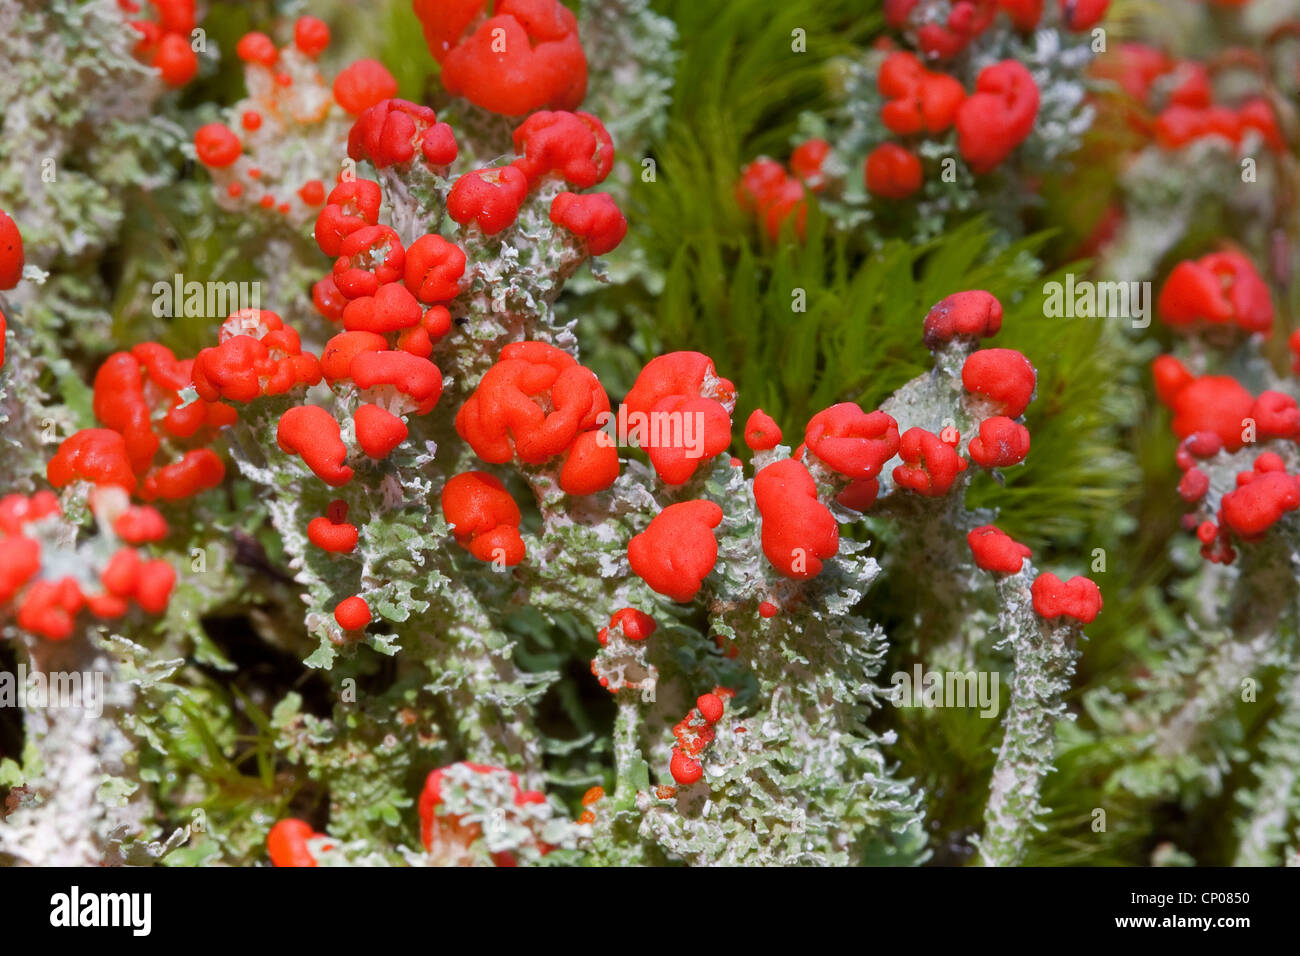 Red Pixie Cup (Cladonia coccifera, Cladonia cornucopioides), with red fruiting bodies, Germany Stock Photo